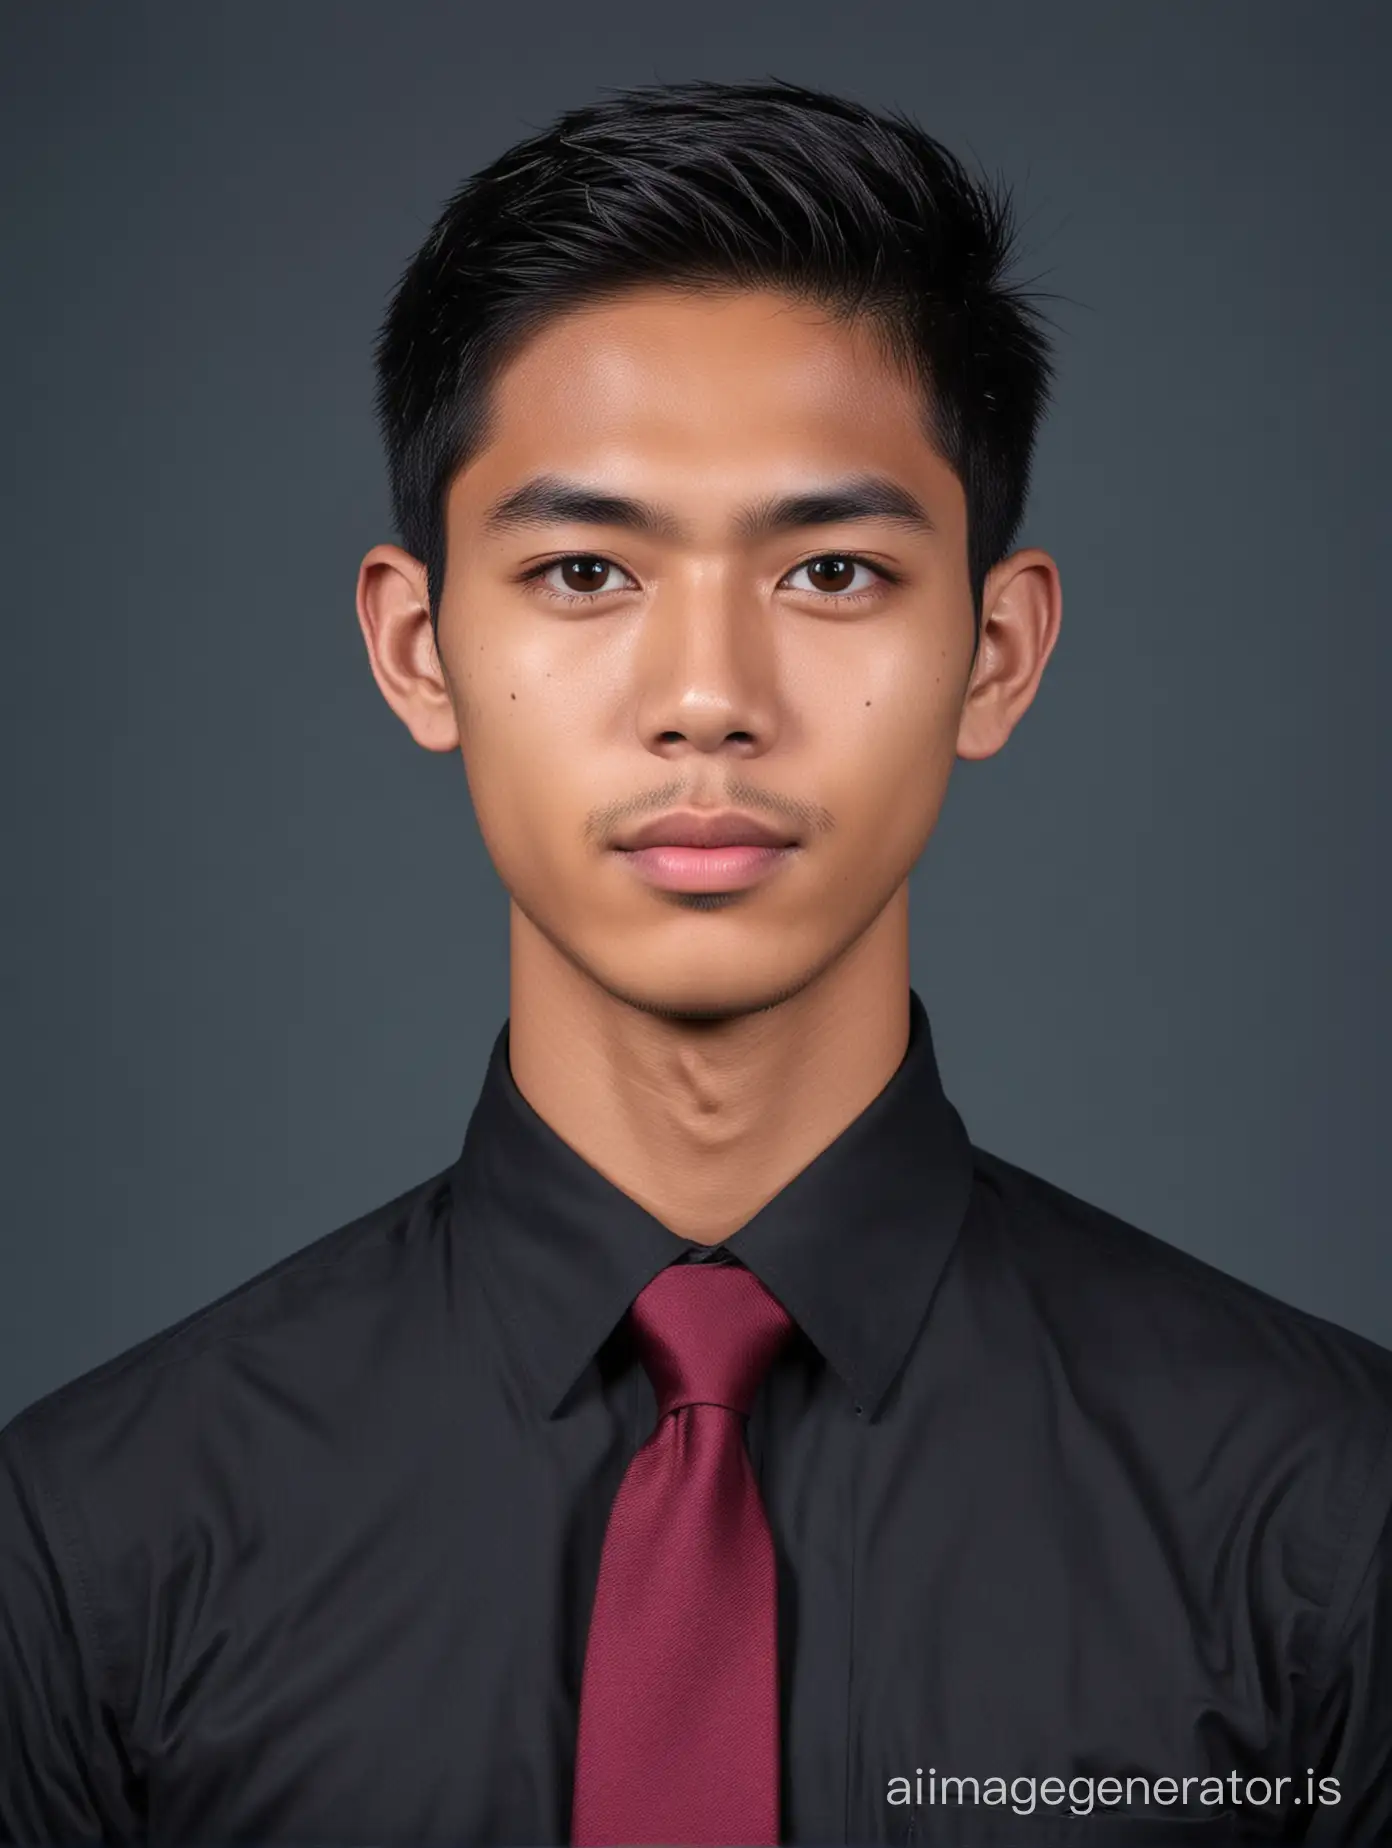 A young handsome indonesian man,age 18 years old,  black short and thin side cut hair. Wearing black long sleeve shirt with maroon tie. Background solid navy blue. Body and face facing the camera, for passport photo, 8K , UHD.